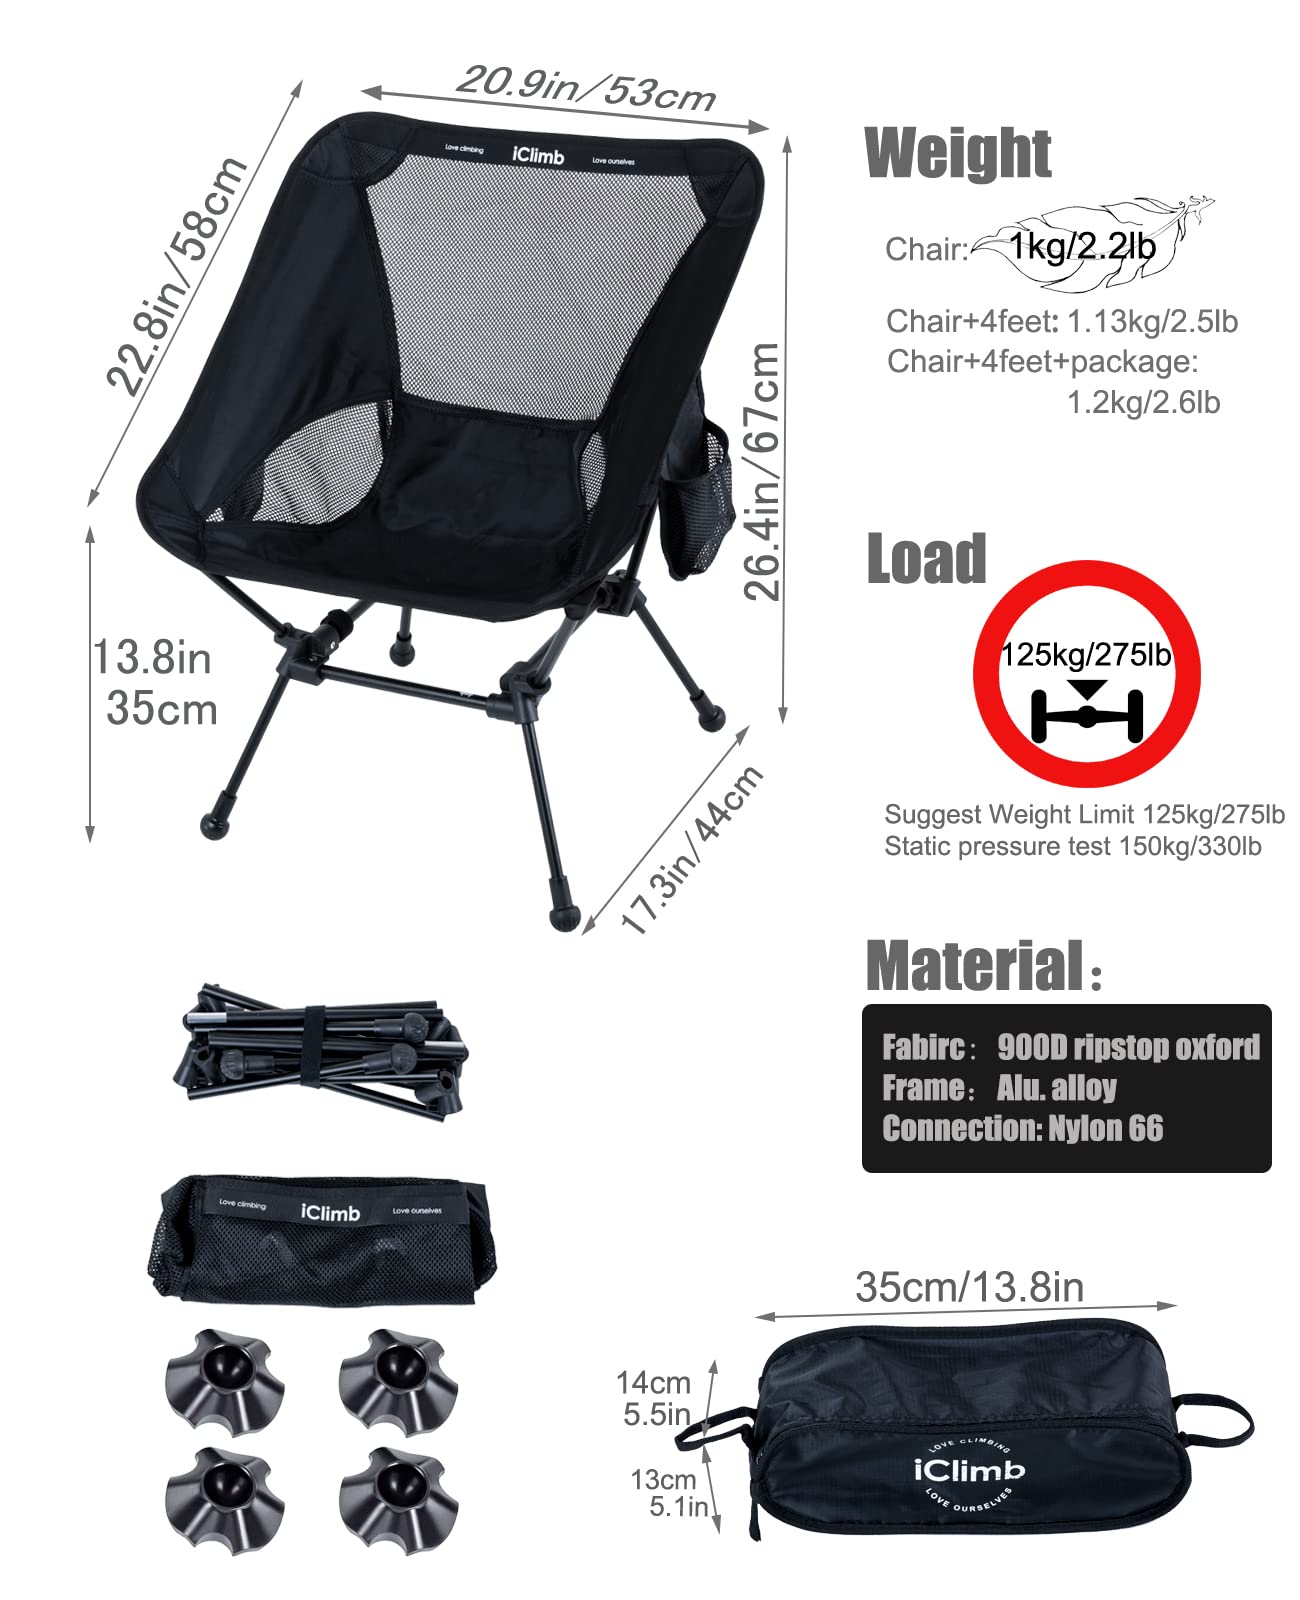 iClimb Ultralight Compact Camping Folding Beach Chair with Anti-Sinking Large Feet and Back Support Webbing (Black - Square Frame)